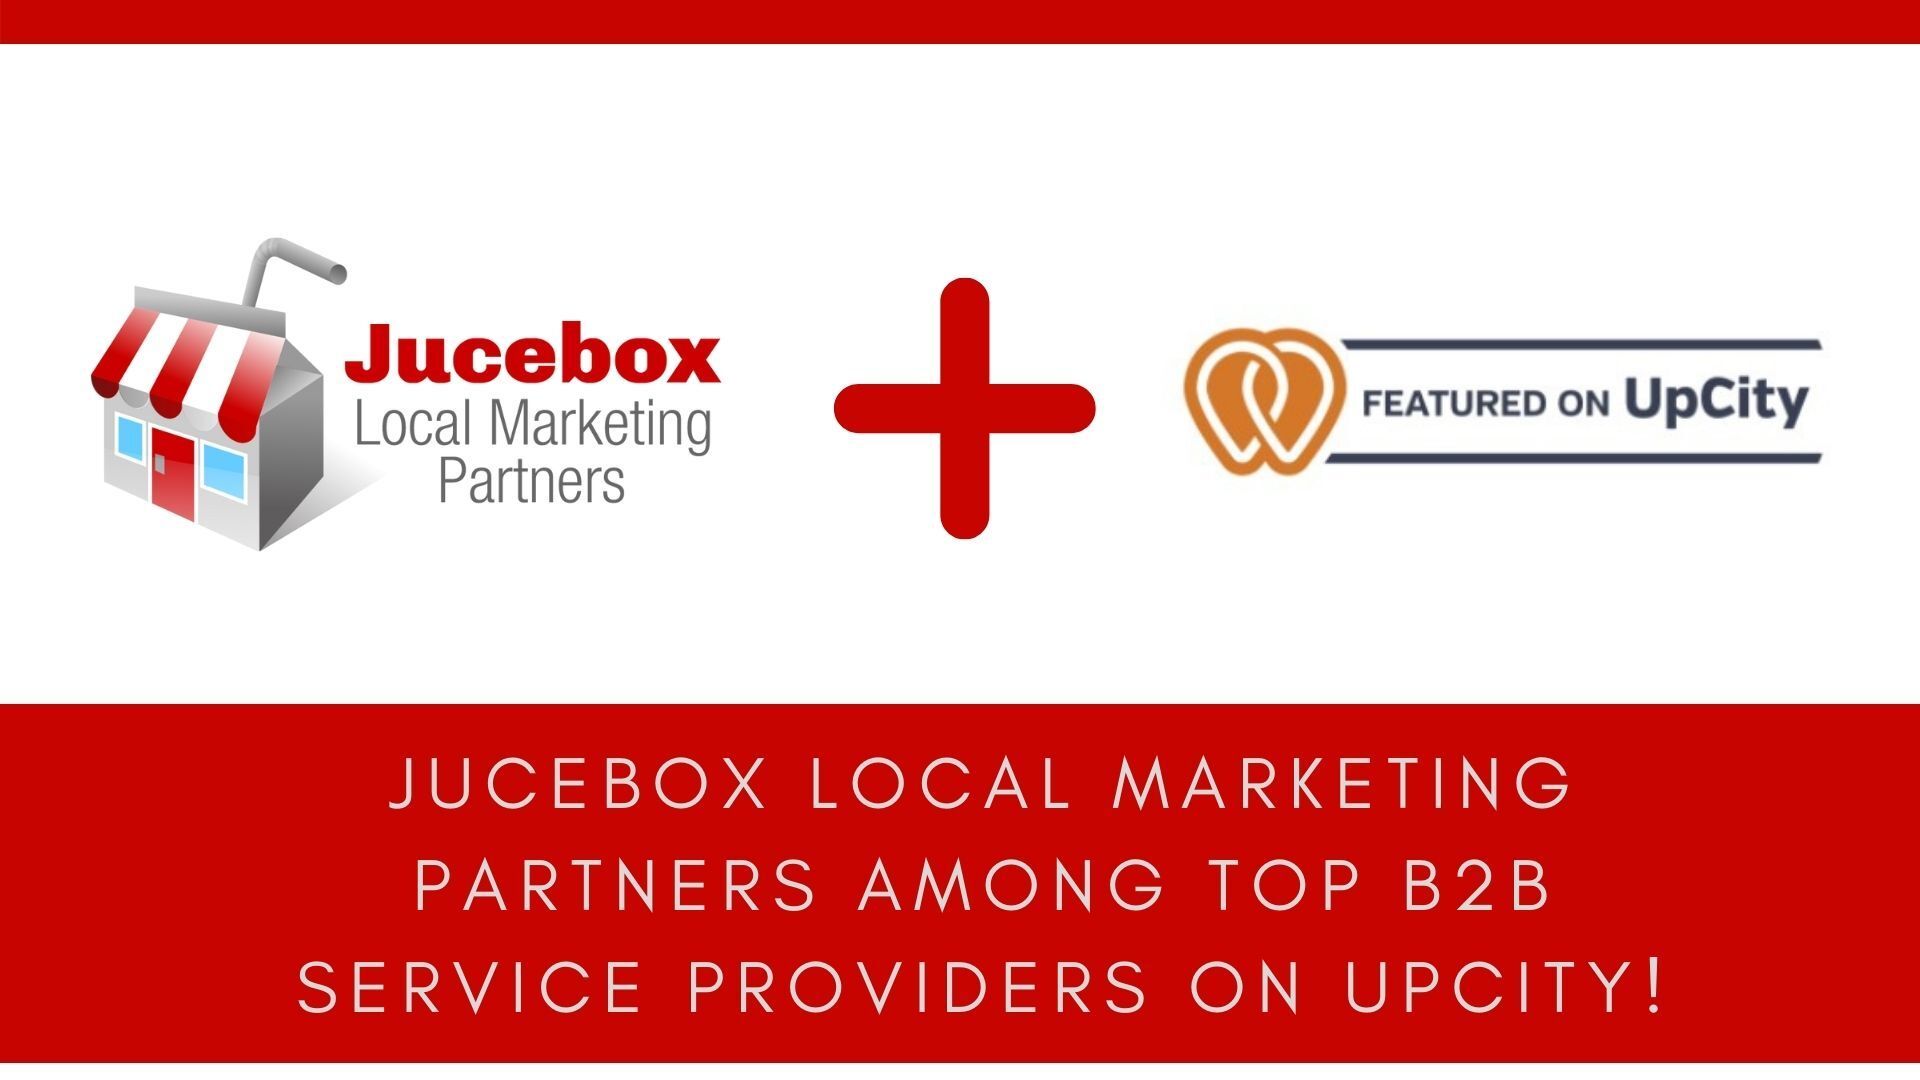 Jucebox Local Marketing Partners is Featured on UpCity